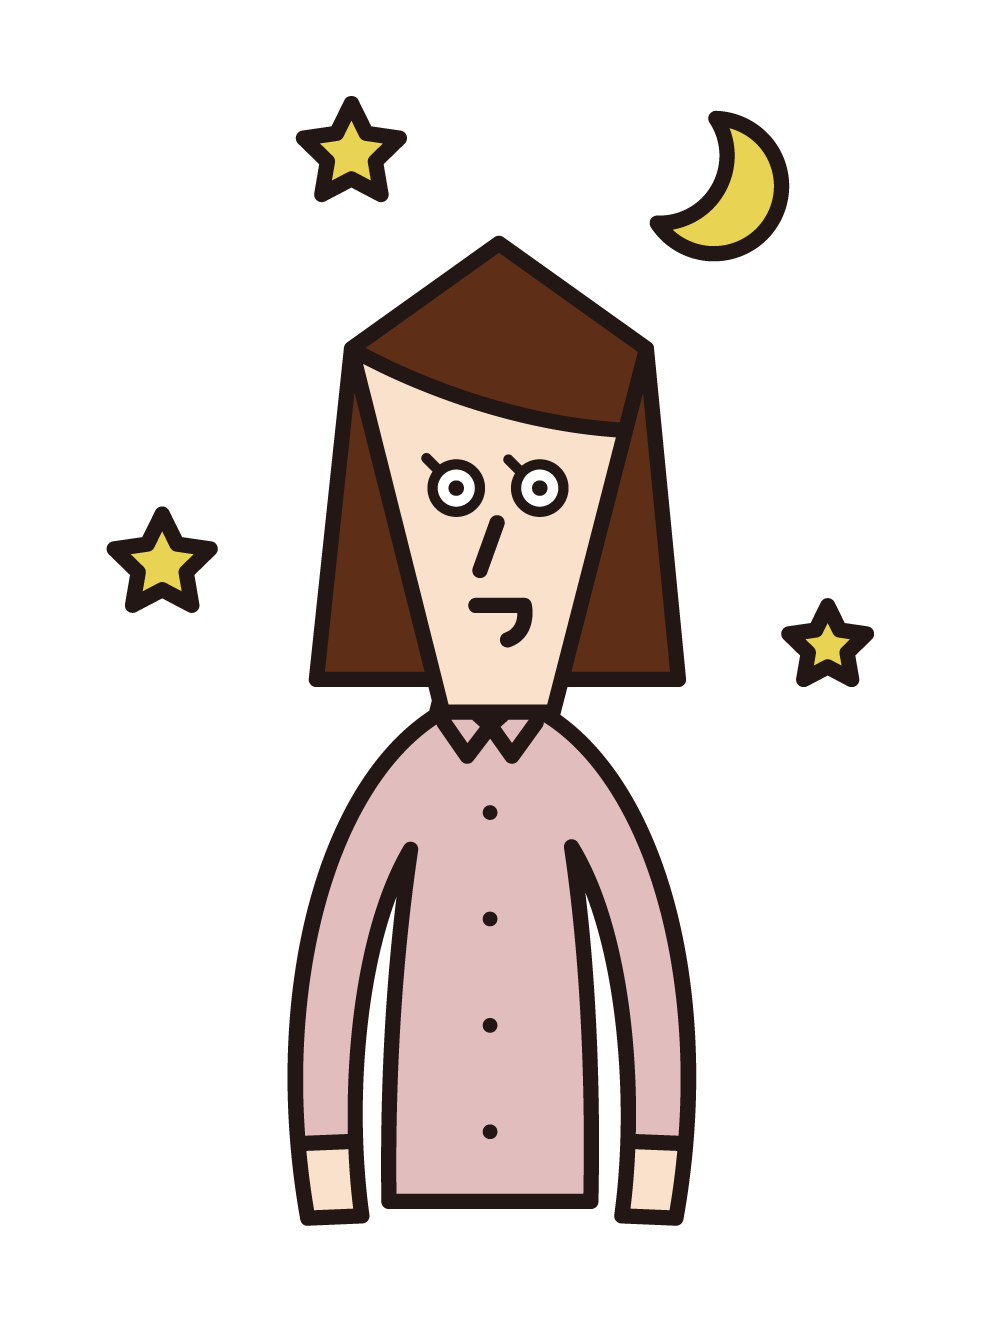 Illustration of a man in pajamas